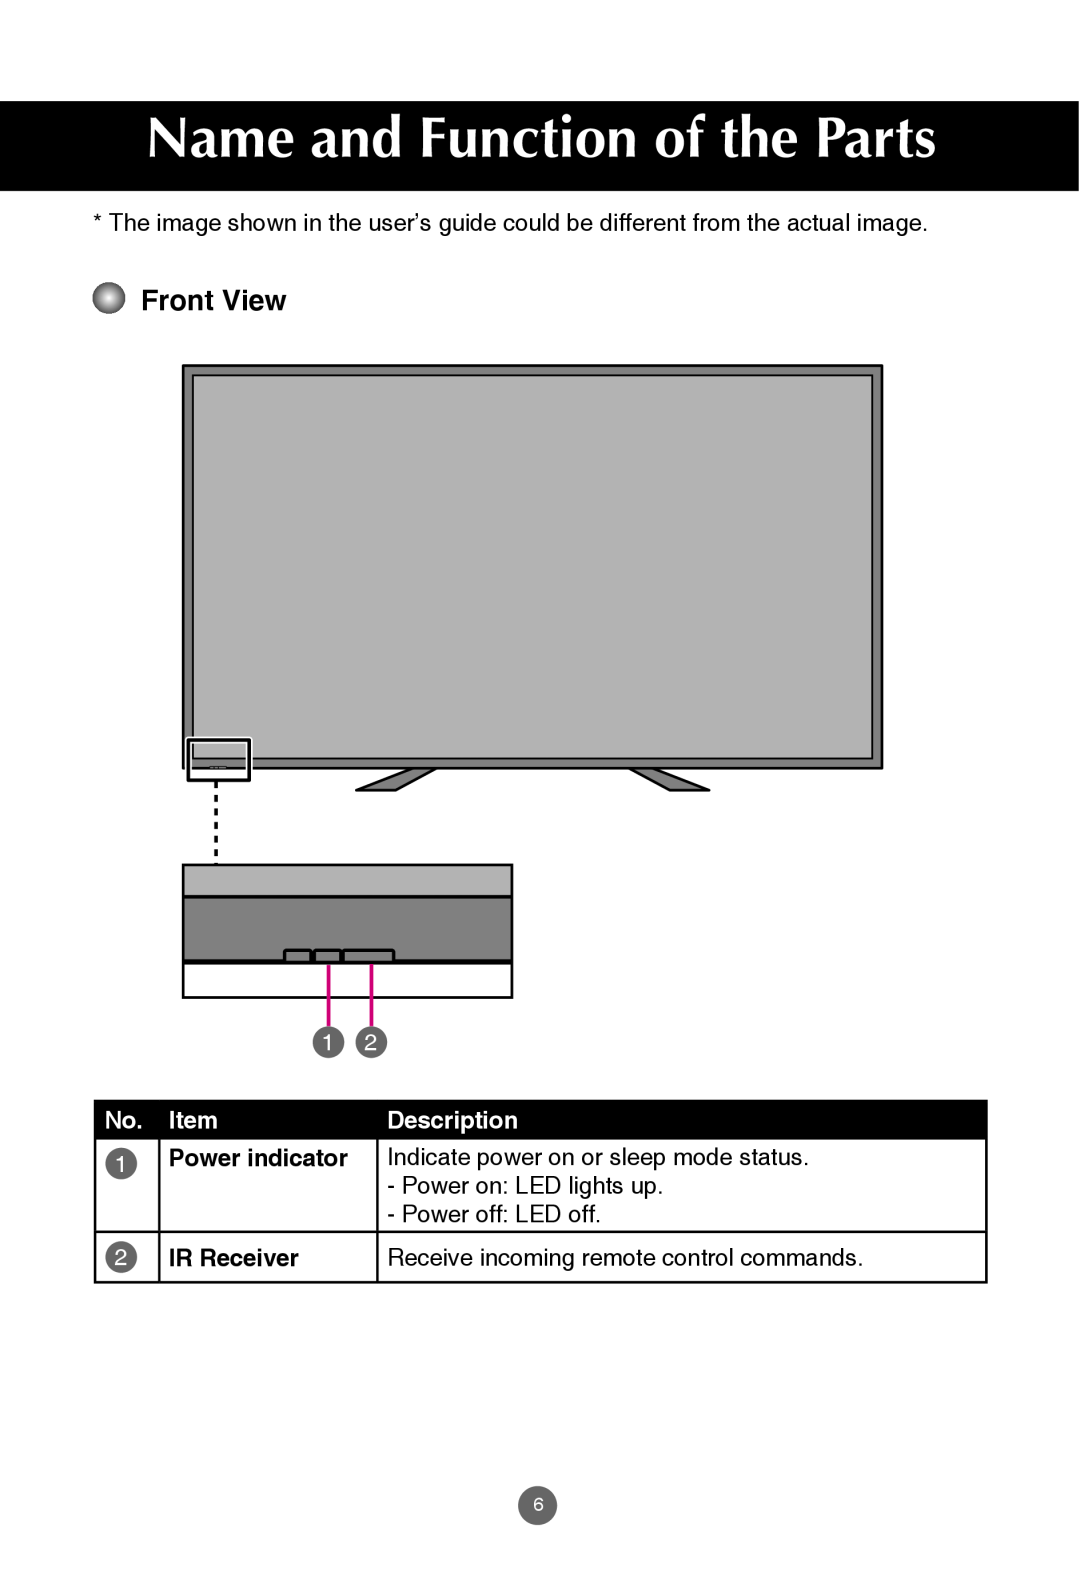 JVC rs-840UD owner manual Name and Function of the Parts, Front View, No. Item, Description, IR Receiver 